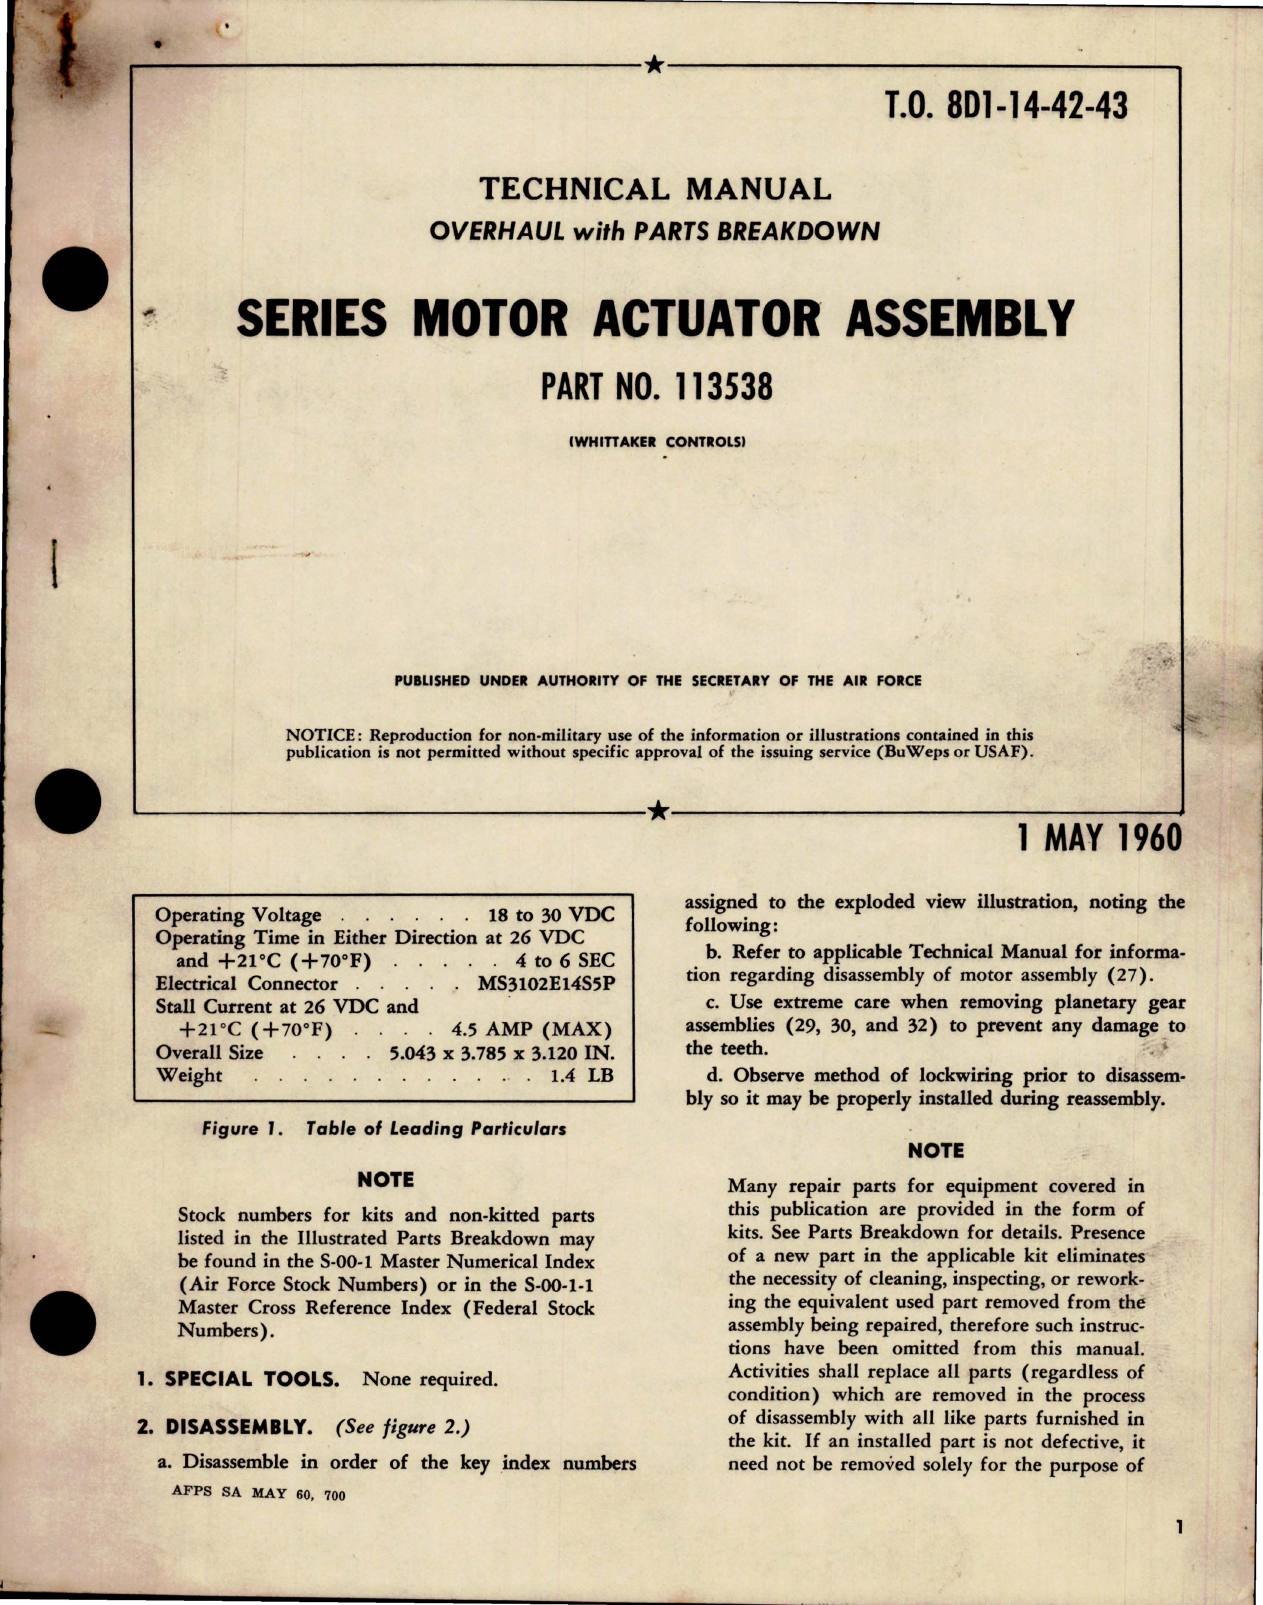 Sample page 1 from AirCorps Library document: Overhaul with Parts Breakdown for Series Motor Actuator Assembly - Part 113538 